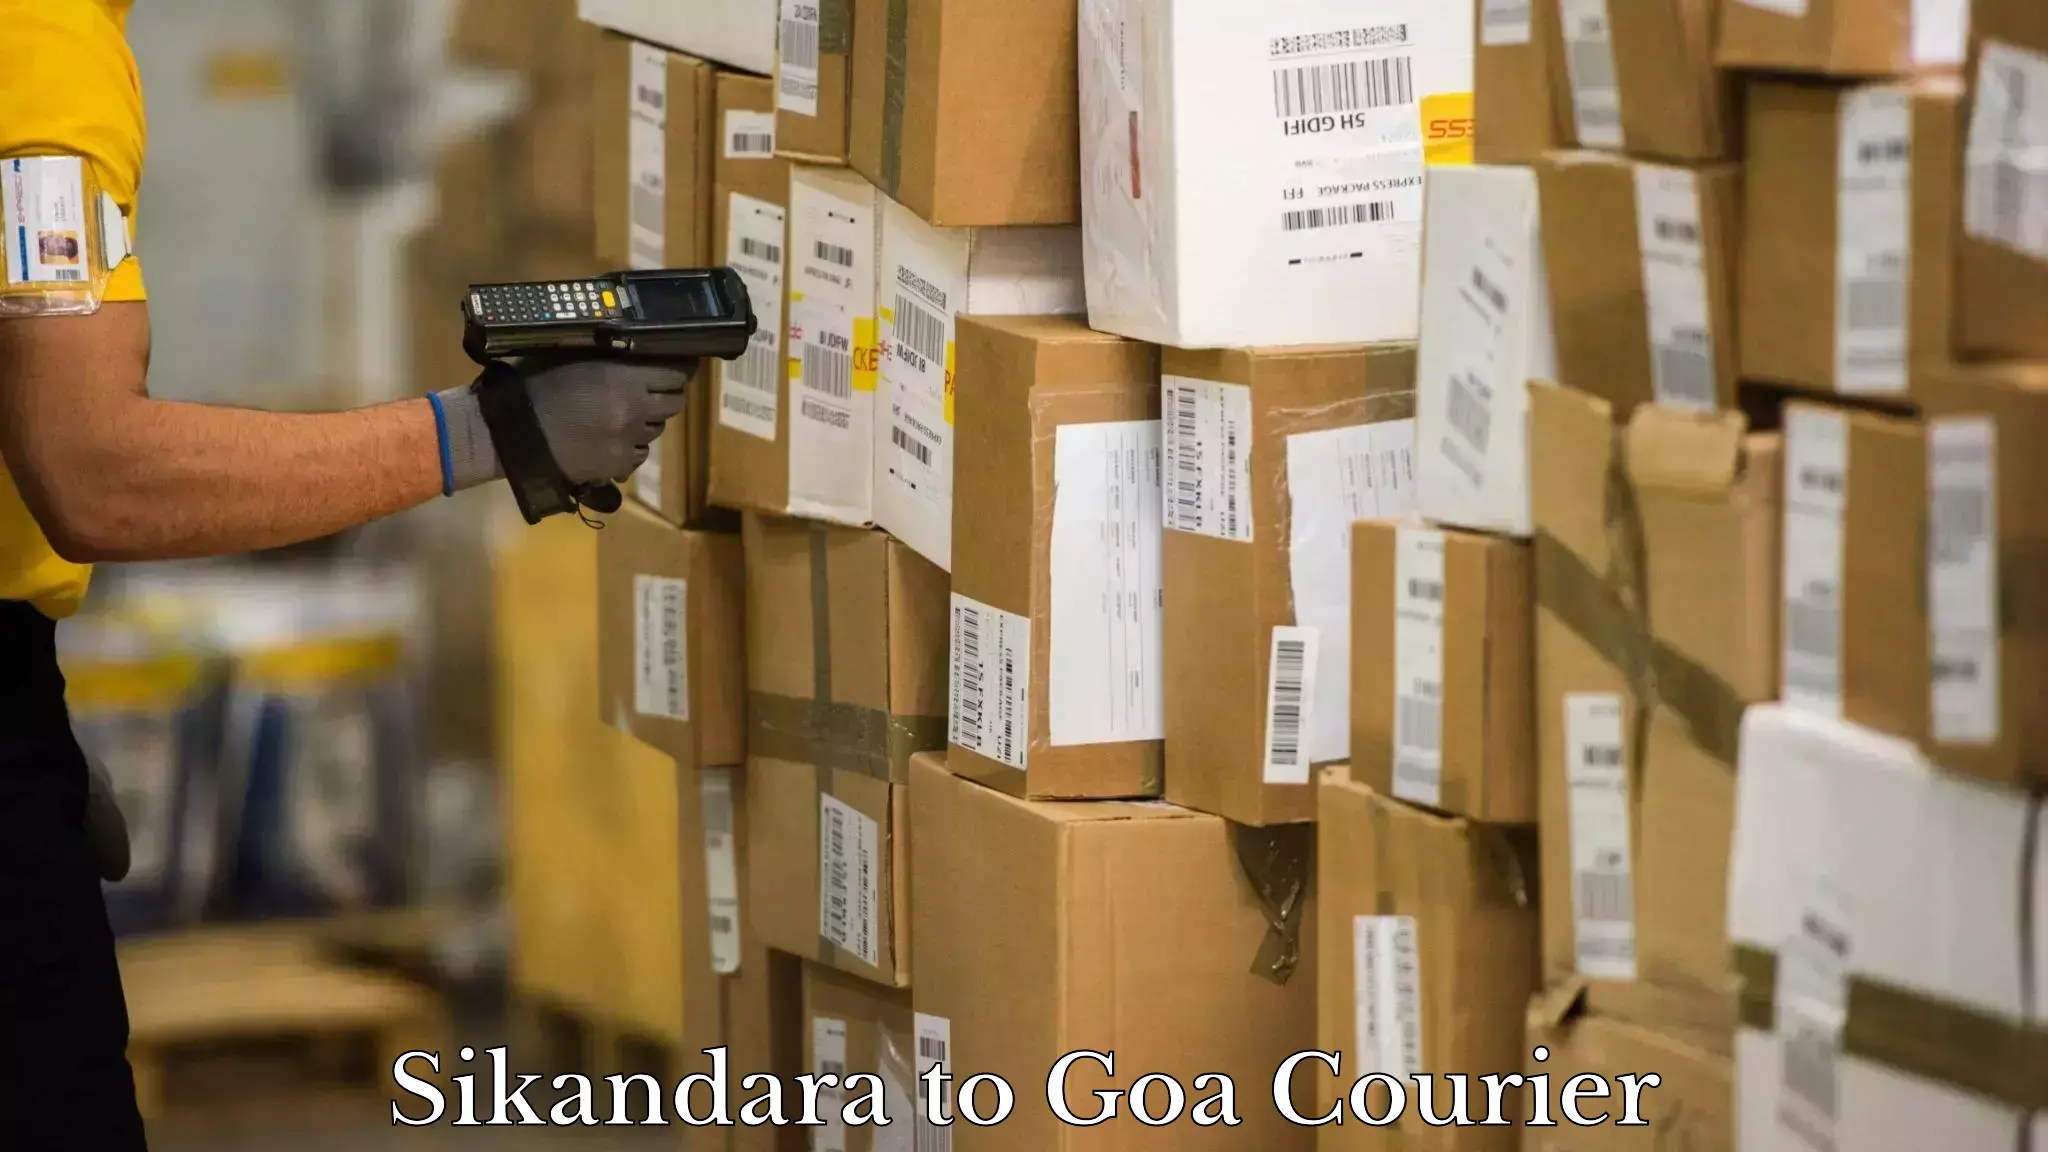 Express delivery network Sikandara to Goa